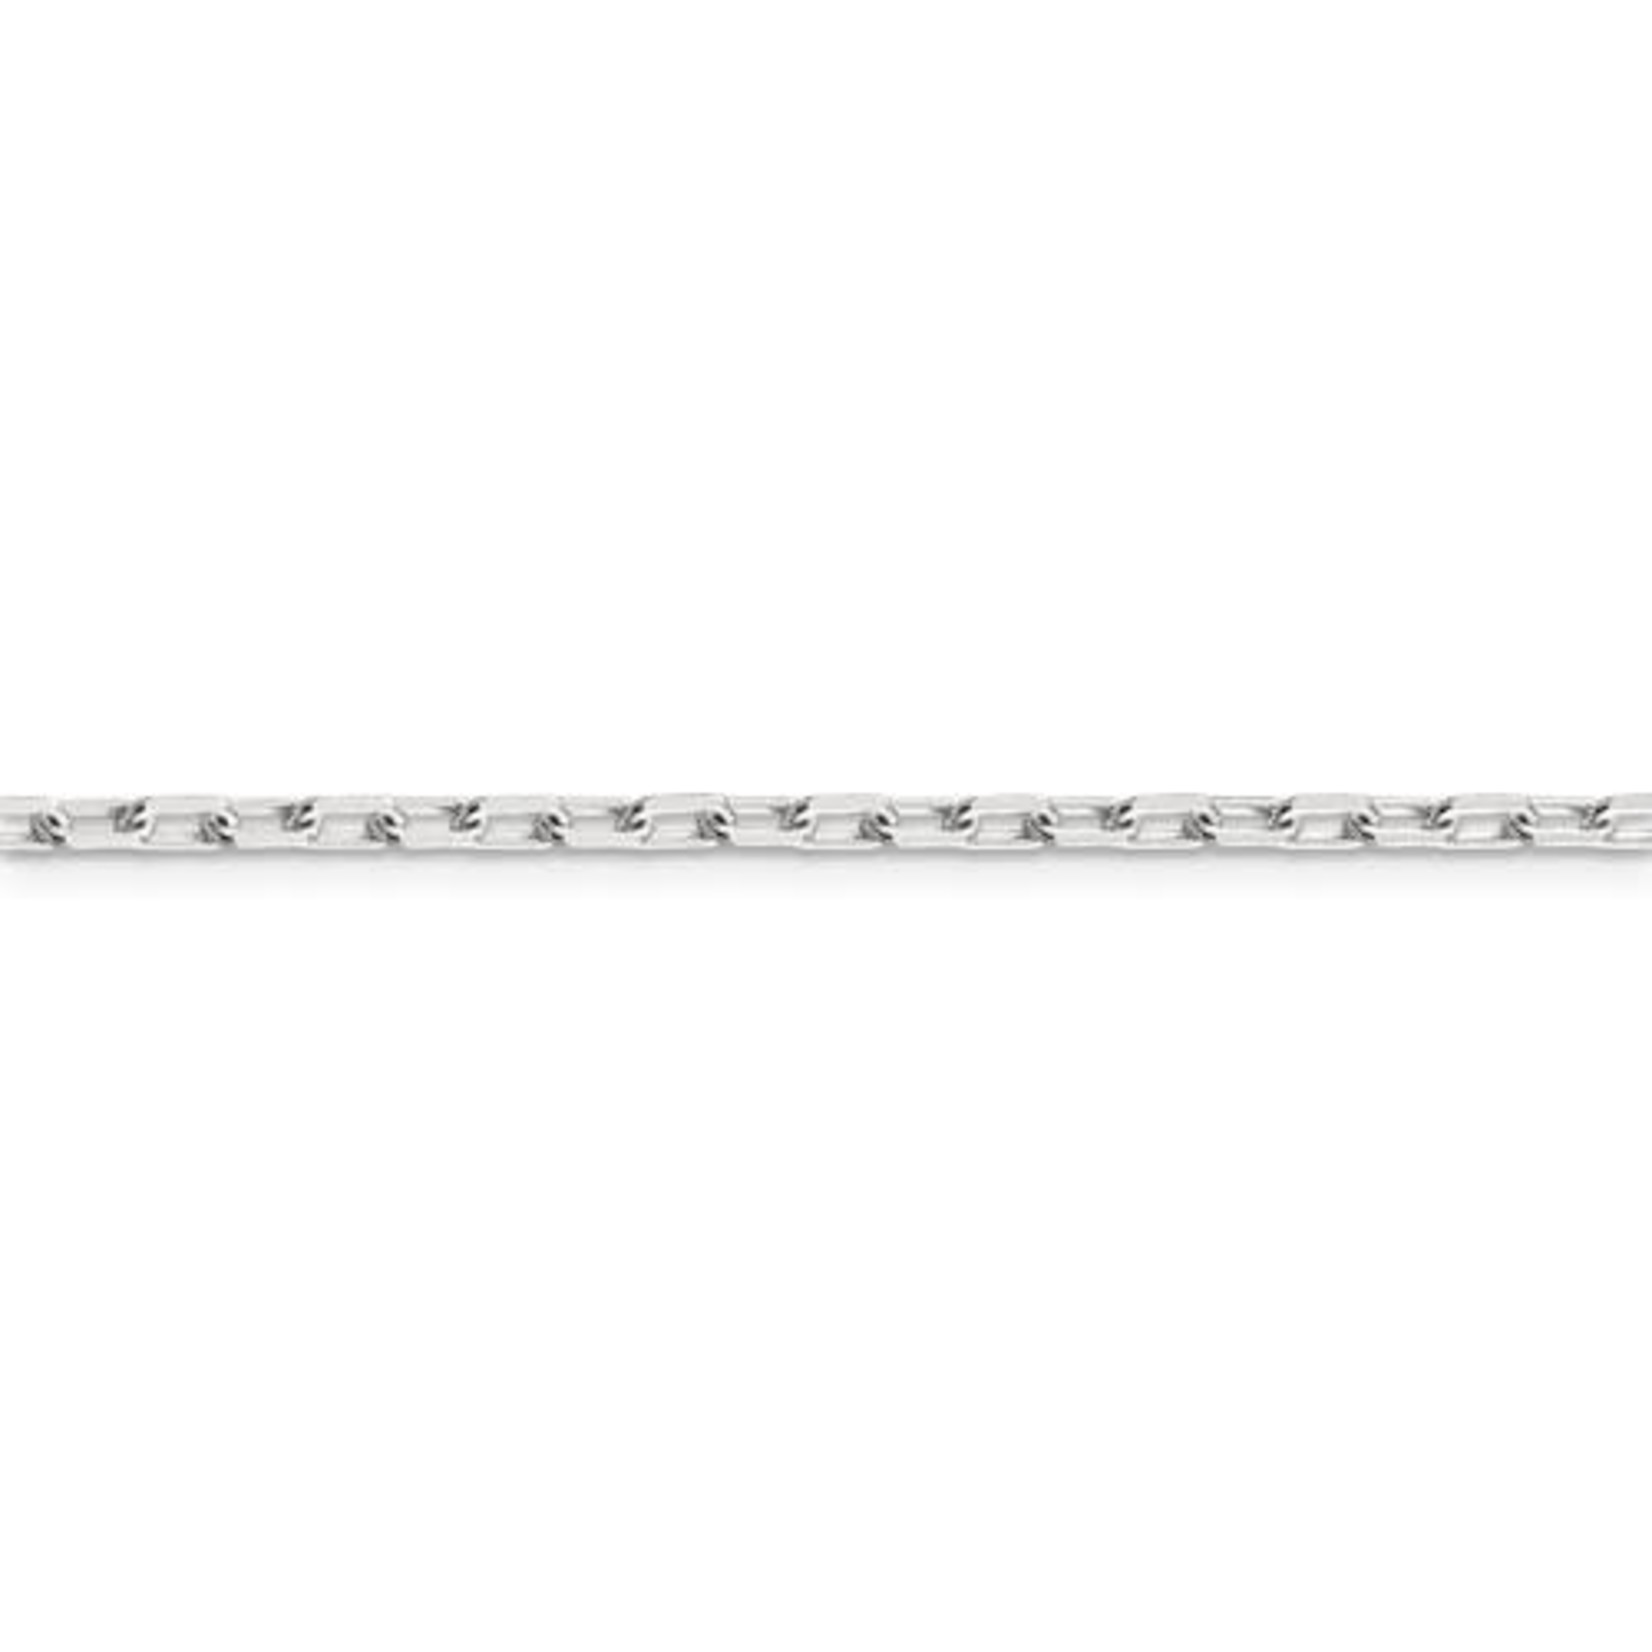 This Is Life Paper Link Diamond Cut Chain 1.65 mm - 20"